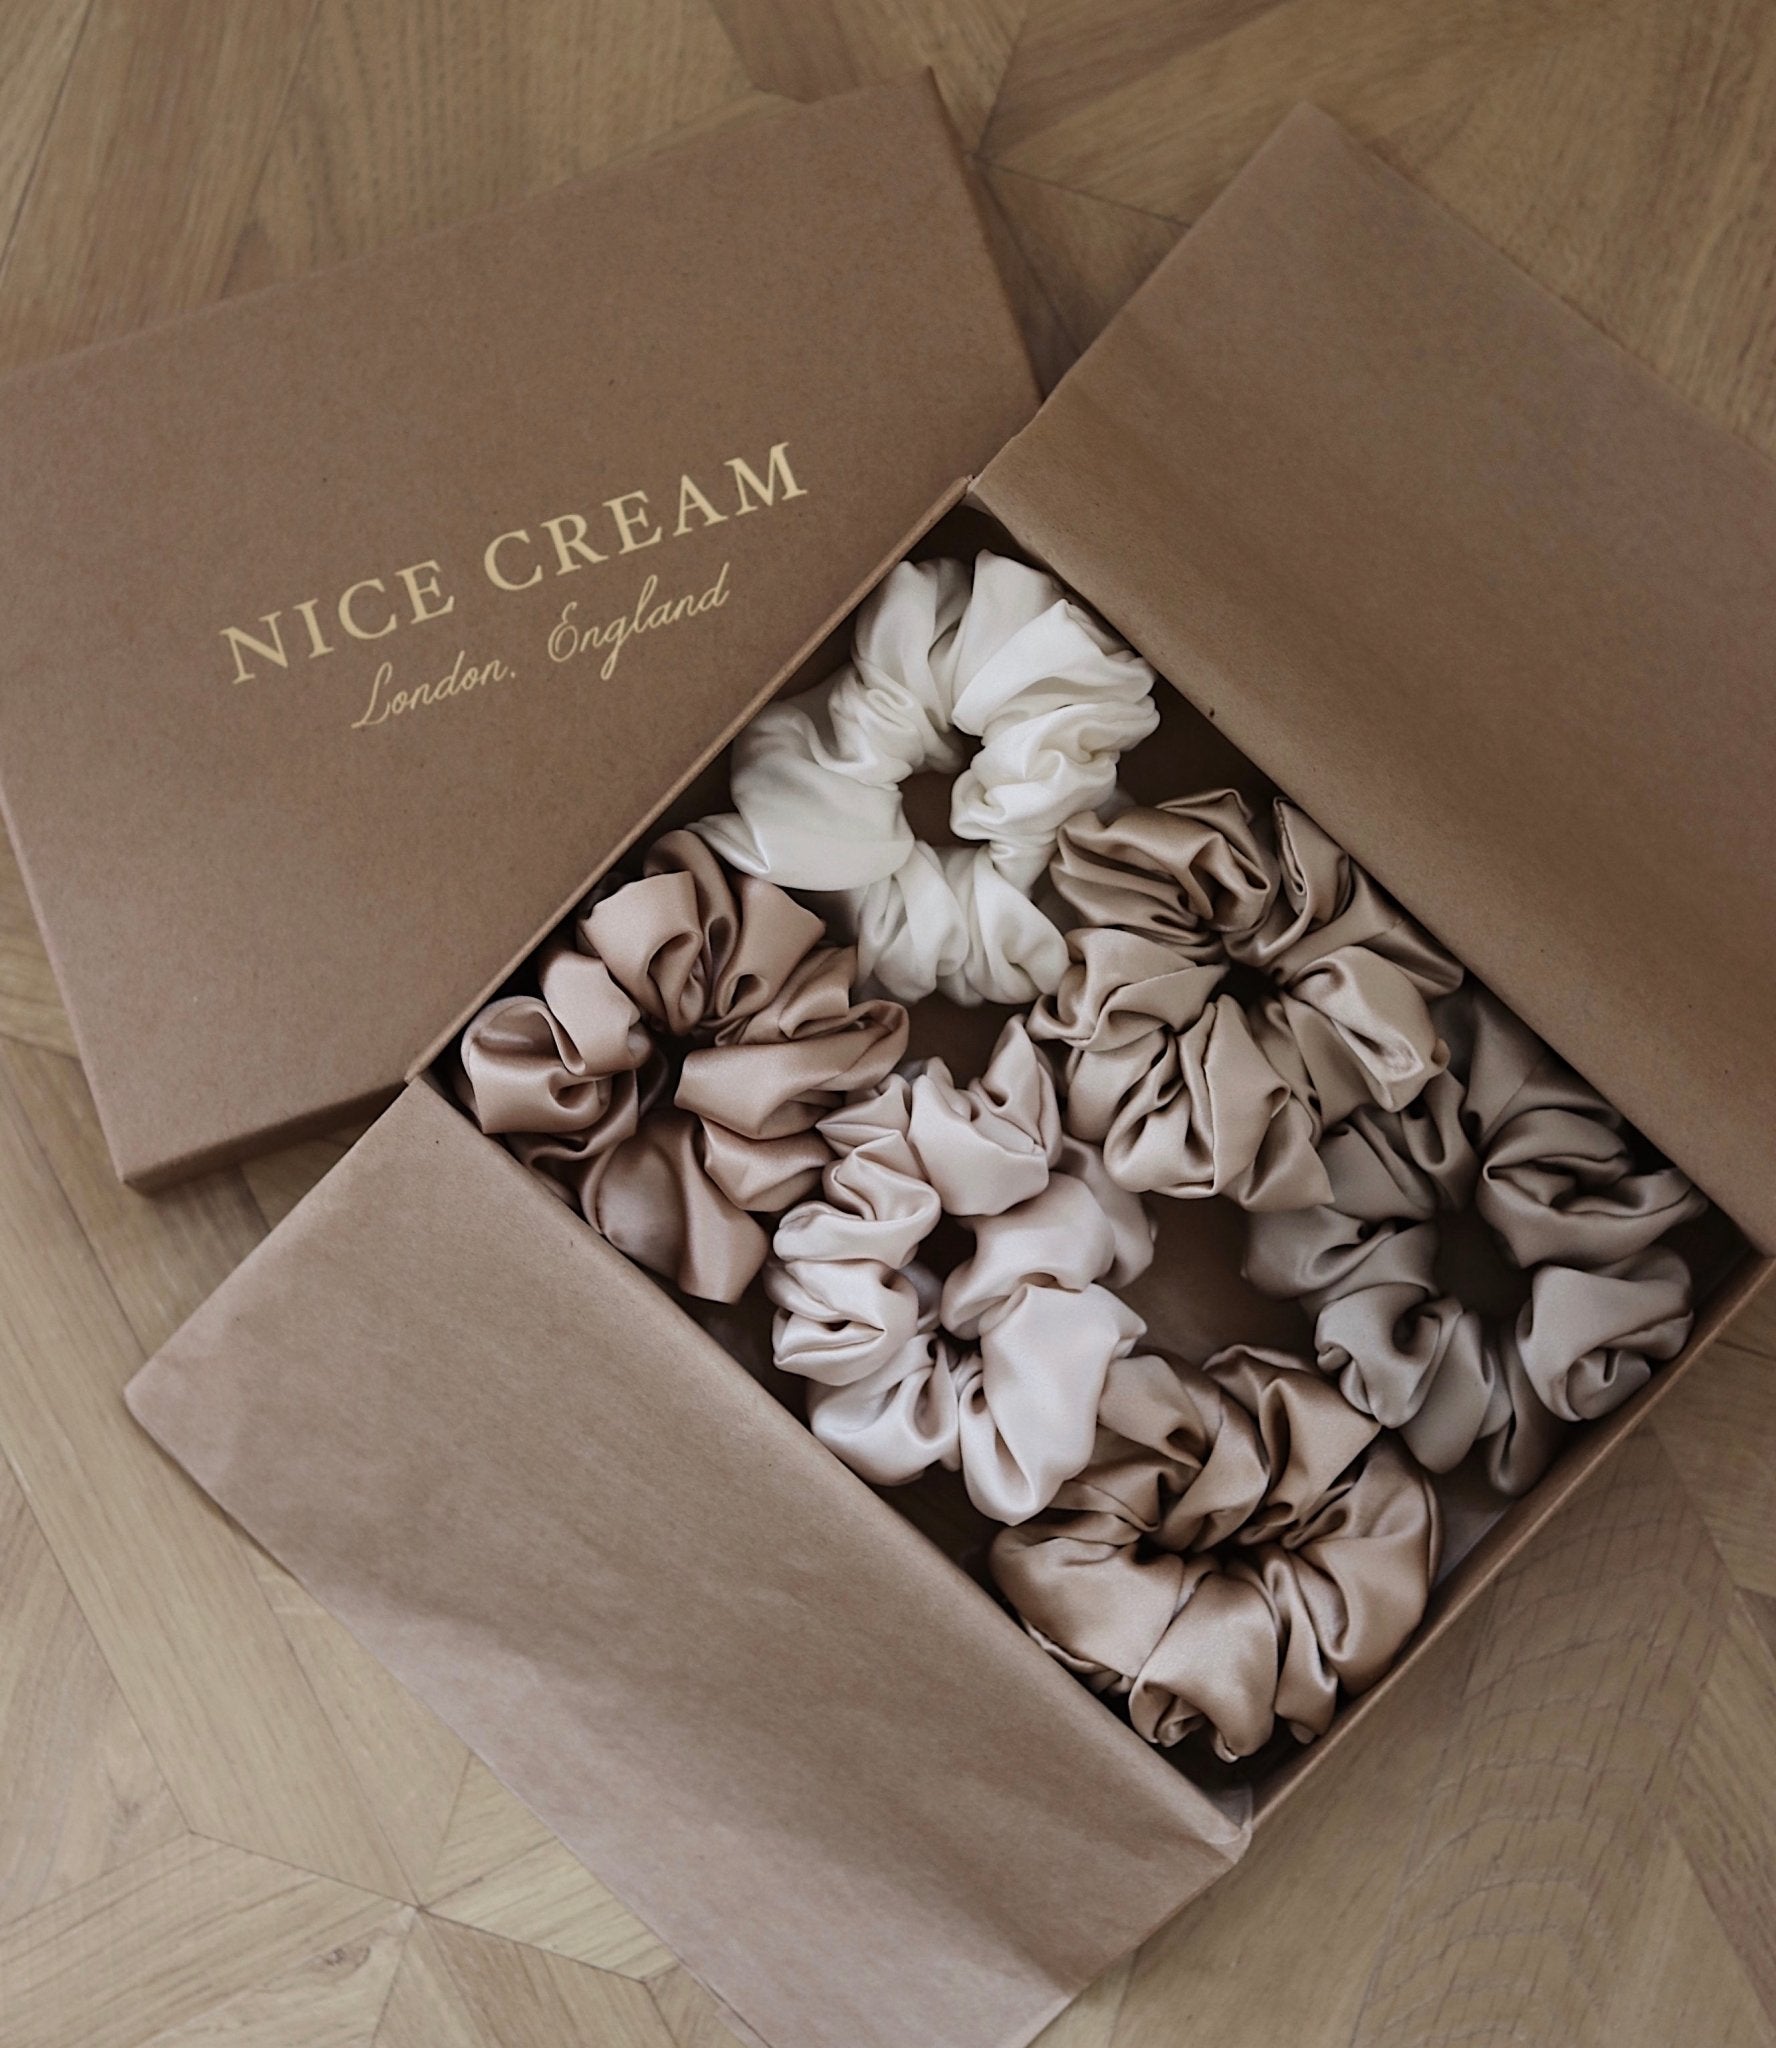 The Nude Collection - Nice Cream London